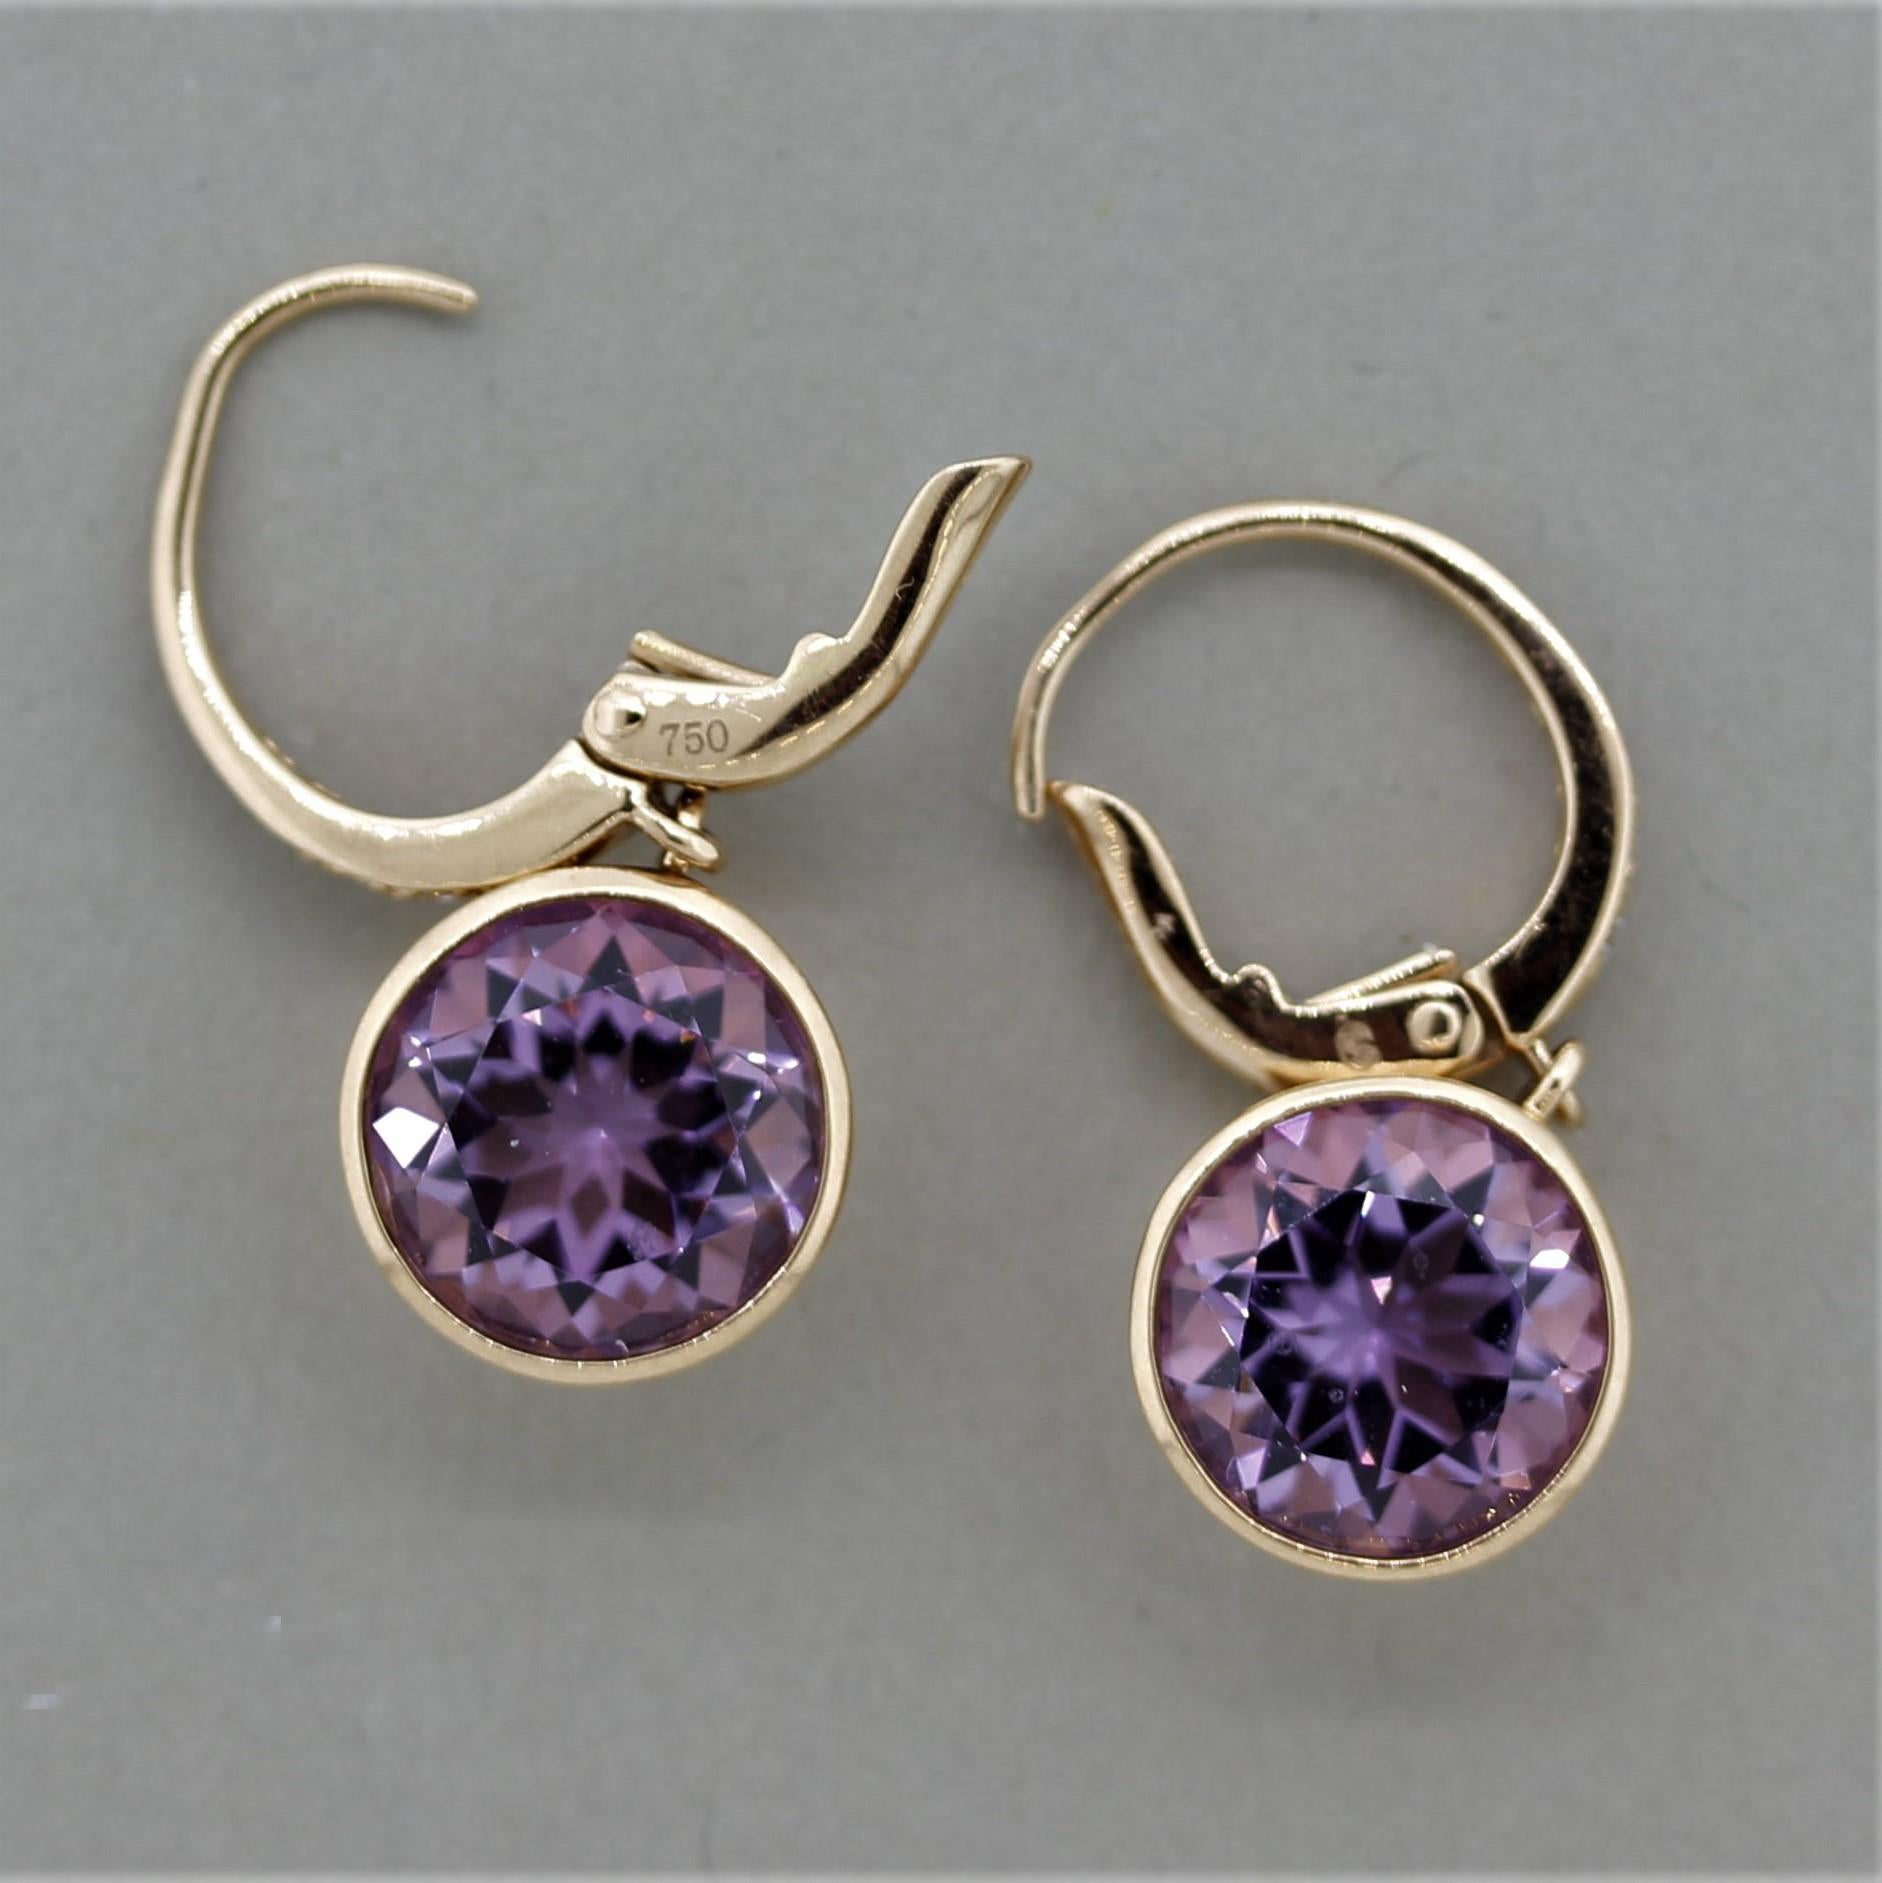 A simple yet stylish pair of modern amethyst earrings! The two amethysts have a bright purple color with a hint of pink and weigh a total of 5.30 carats. They are accented by 0.10 carats of round brilliant cut diamonds set above them. Made in 18k